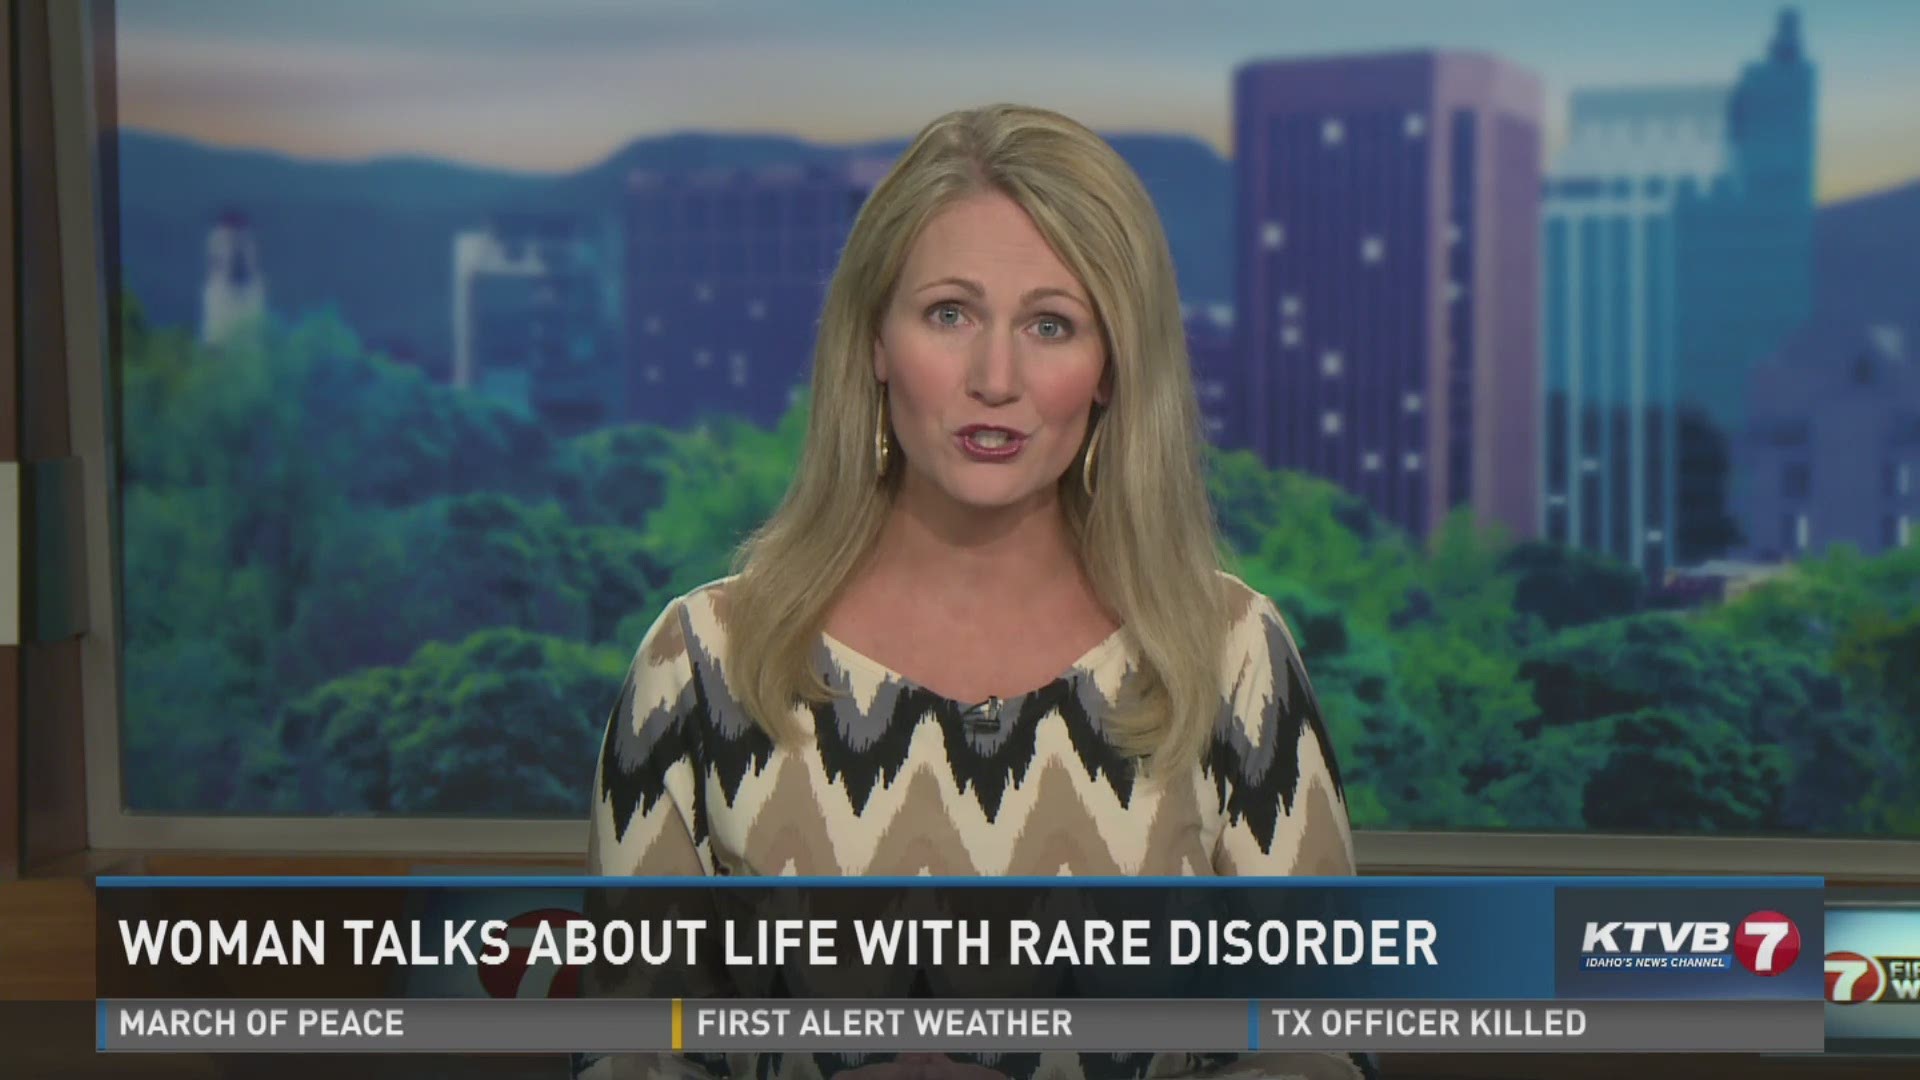 Woman talks about life with rare disorder